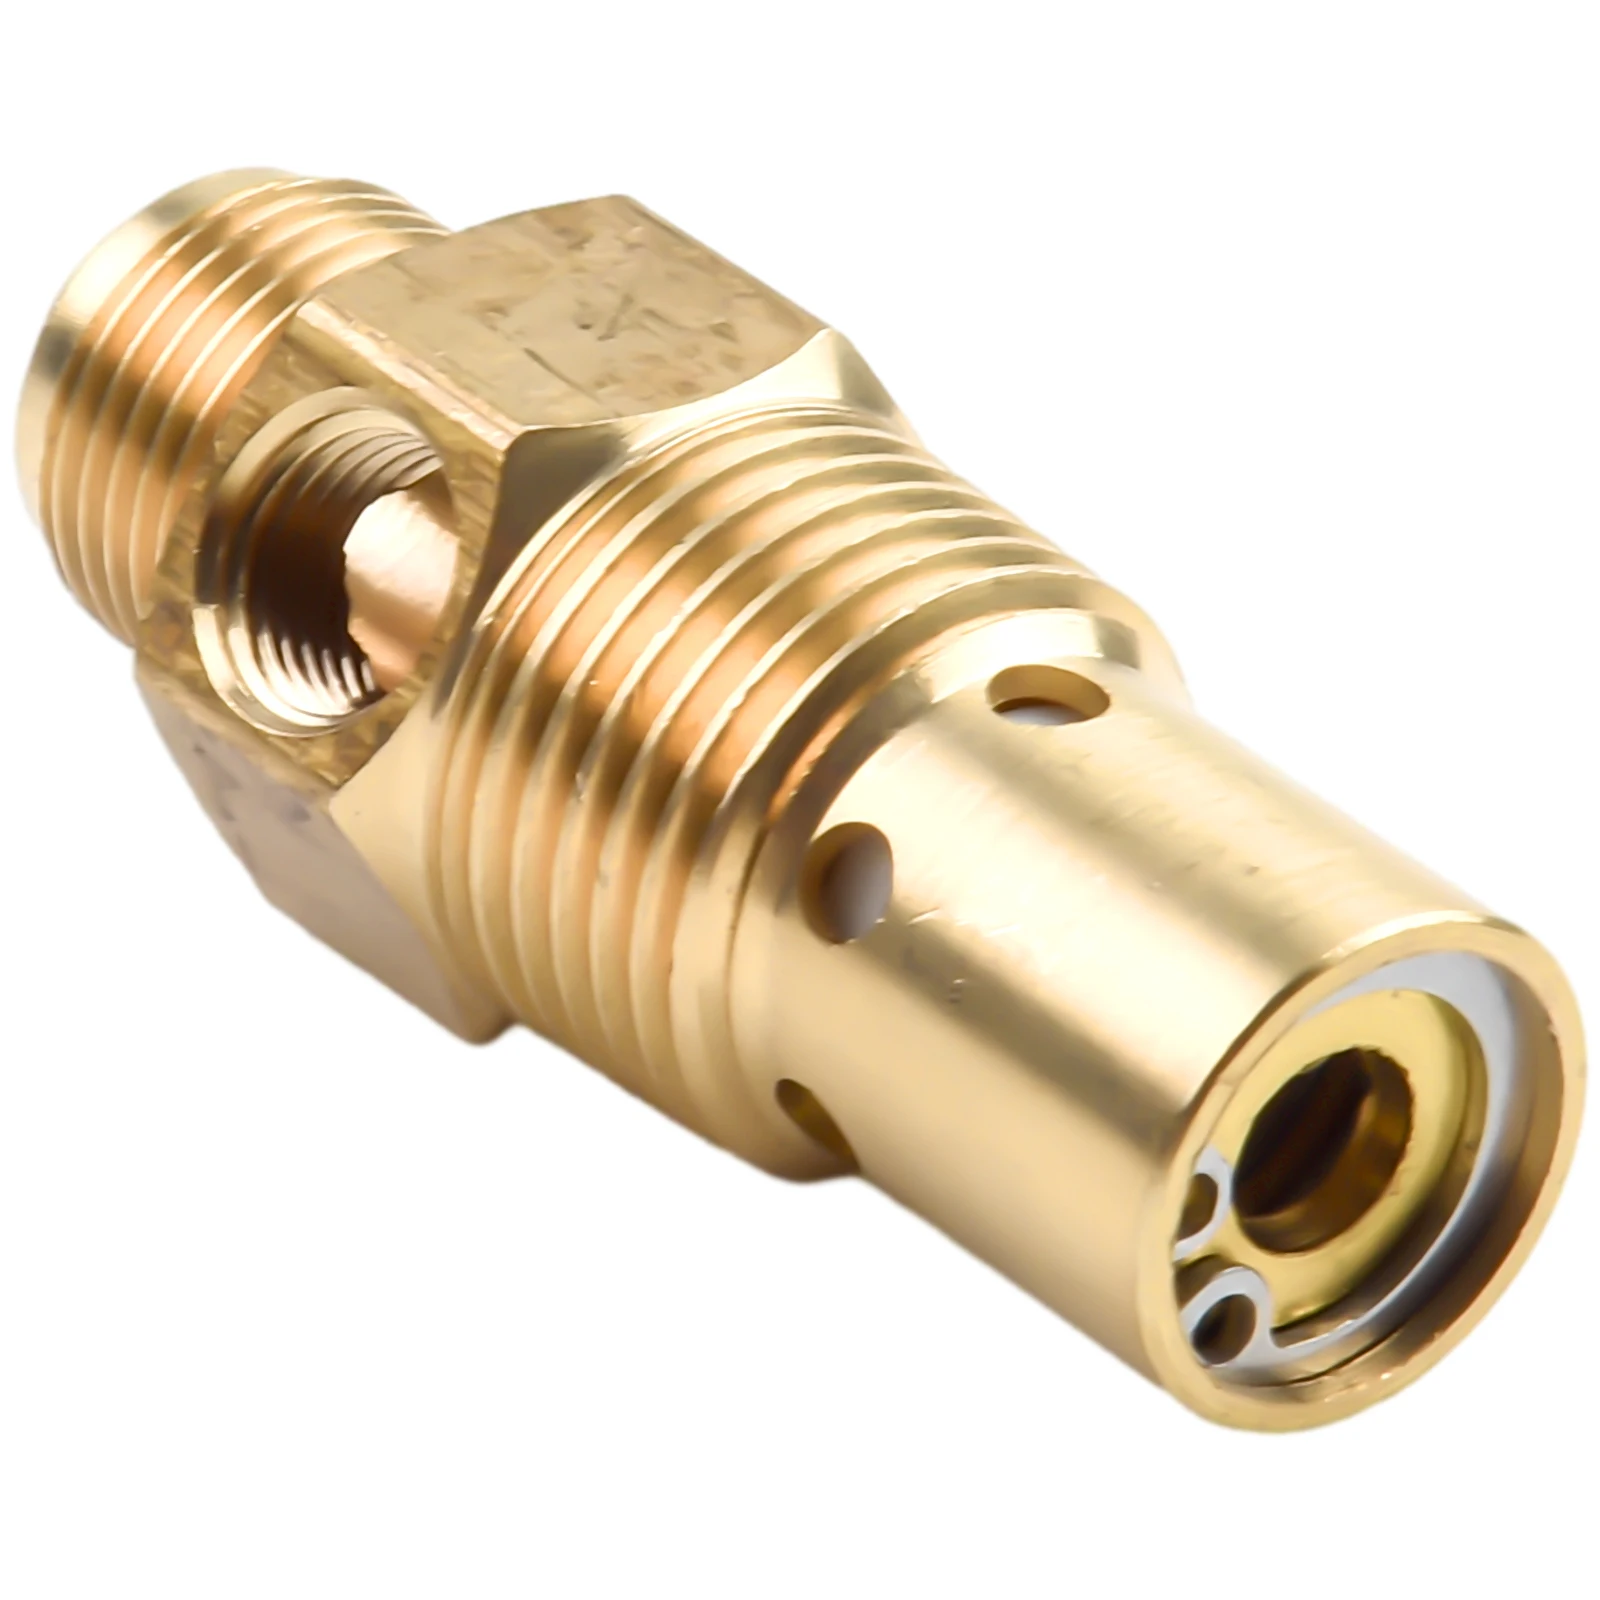 Brass Check Valve G3/8 Air Compressor Male Threaded NPT×1/2In For Air Compressor Replacement Radiator Check Valve